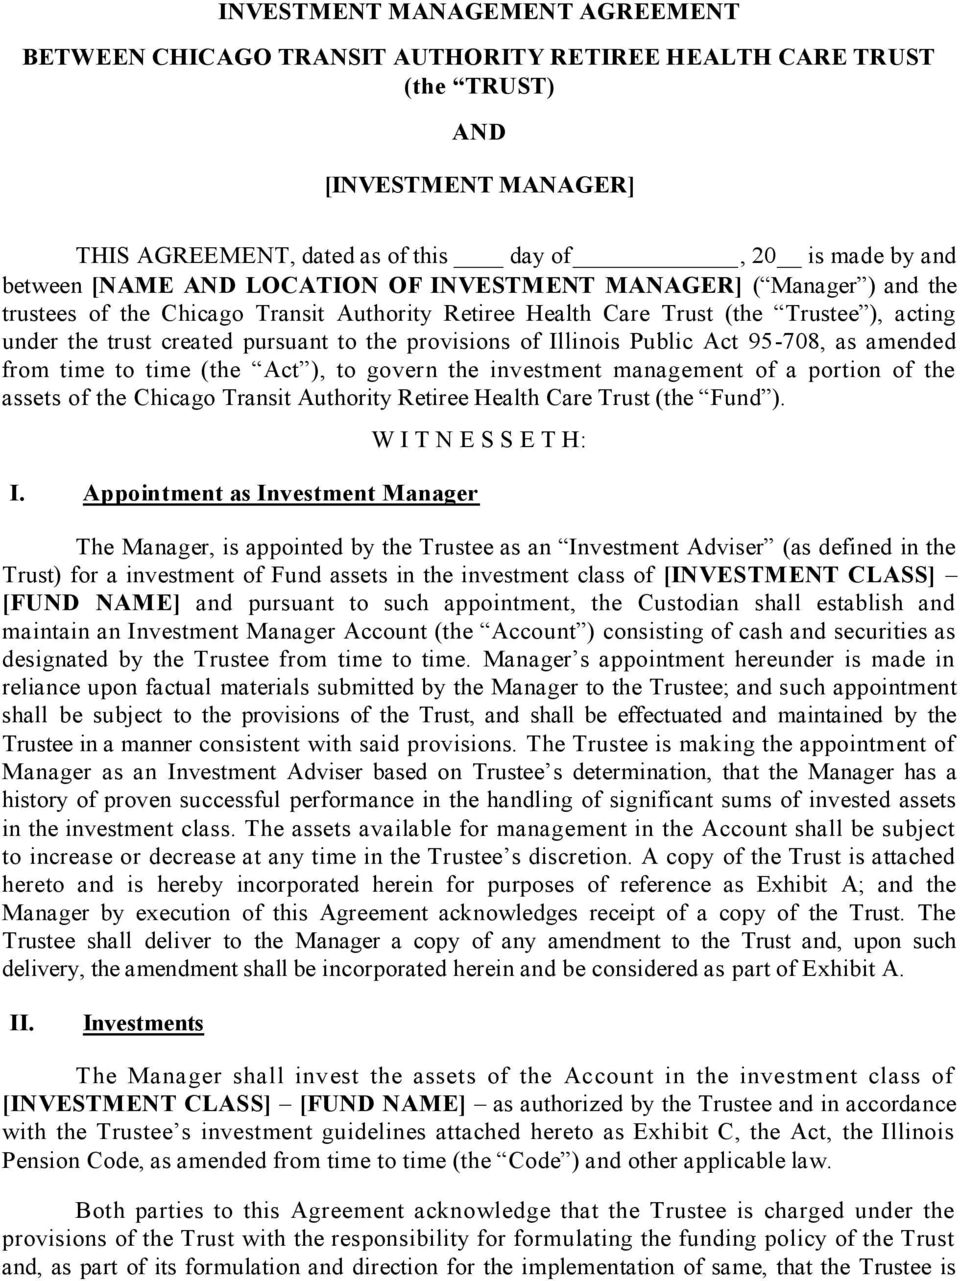 Investment Management Agreement Investment Management Agreement Between Chicago Transit Authority